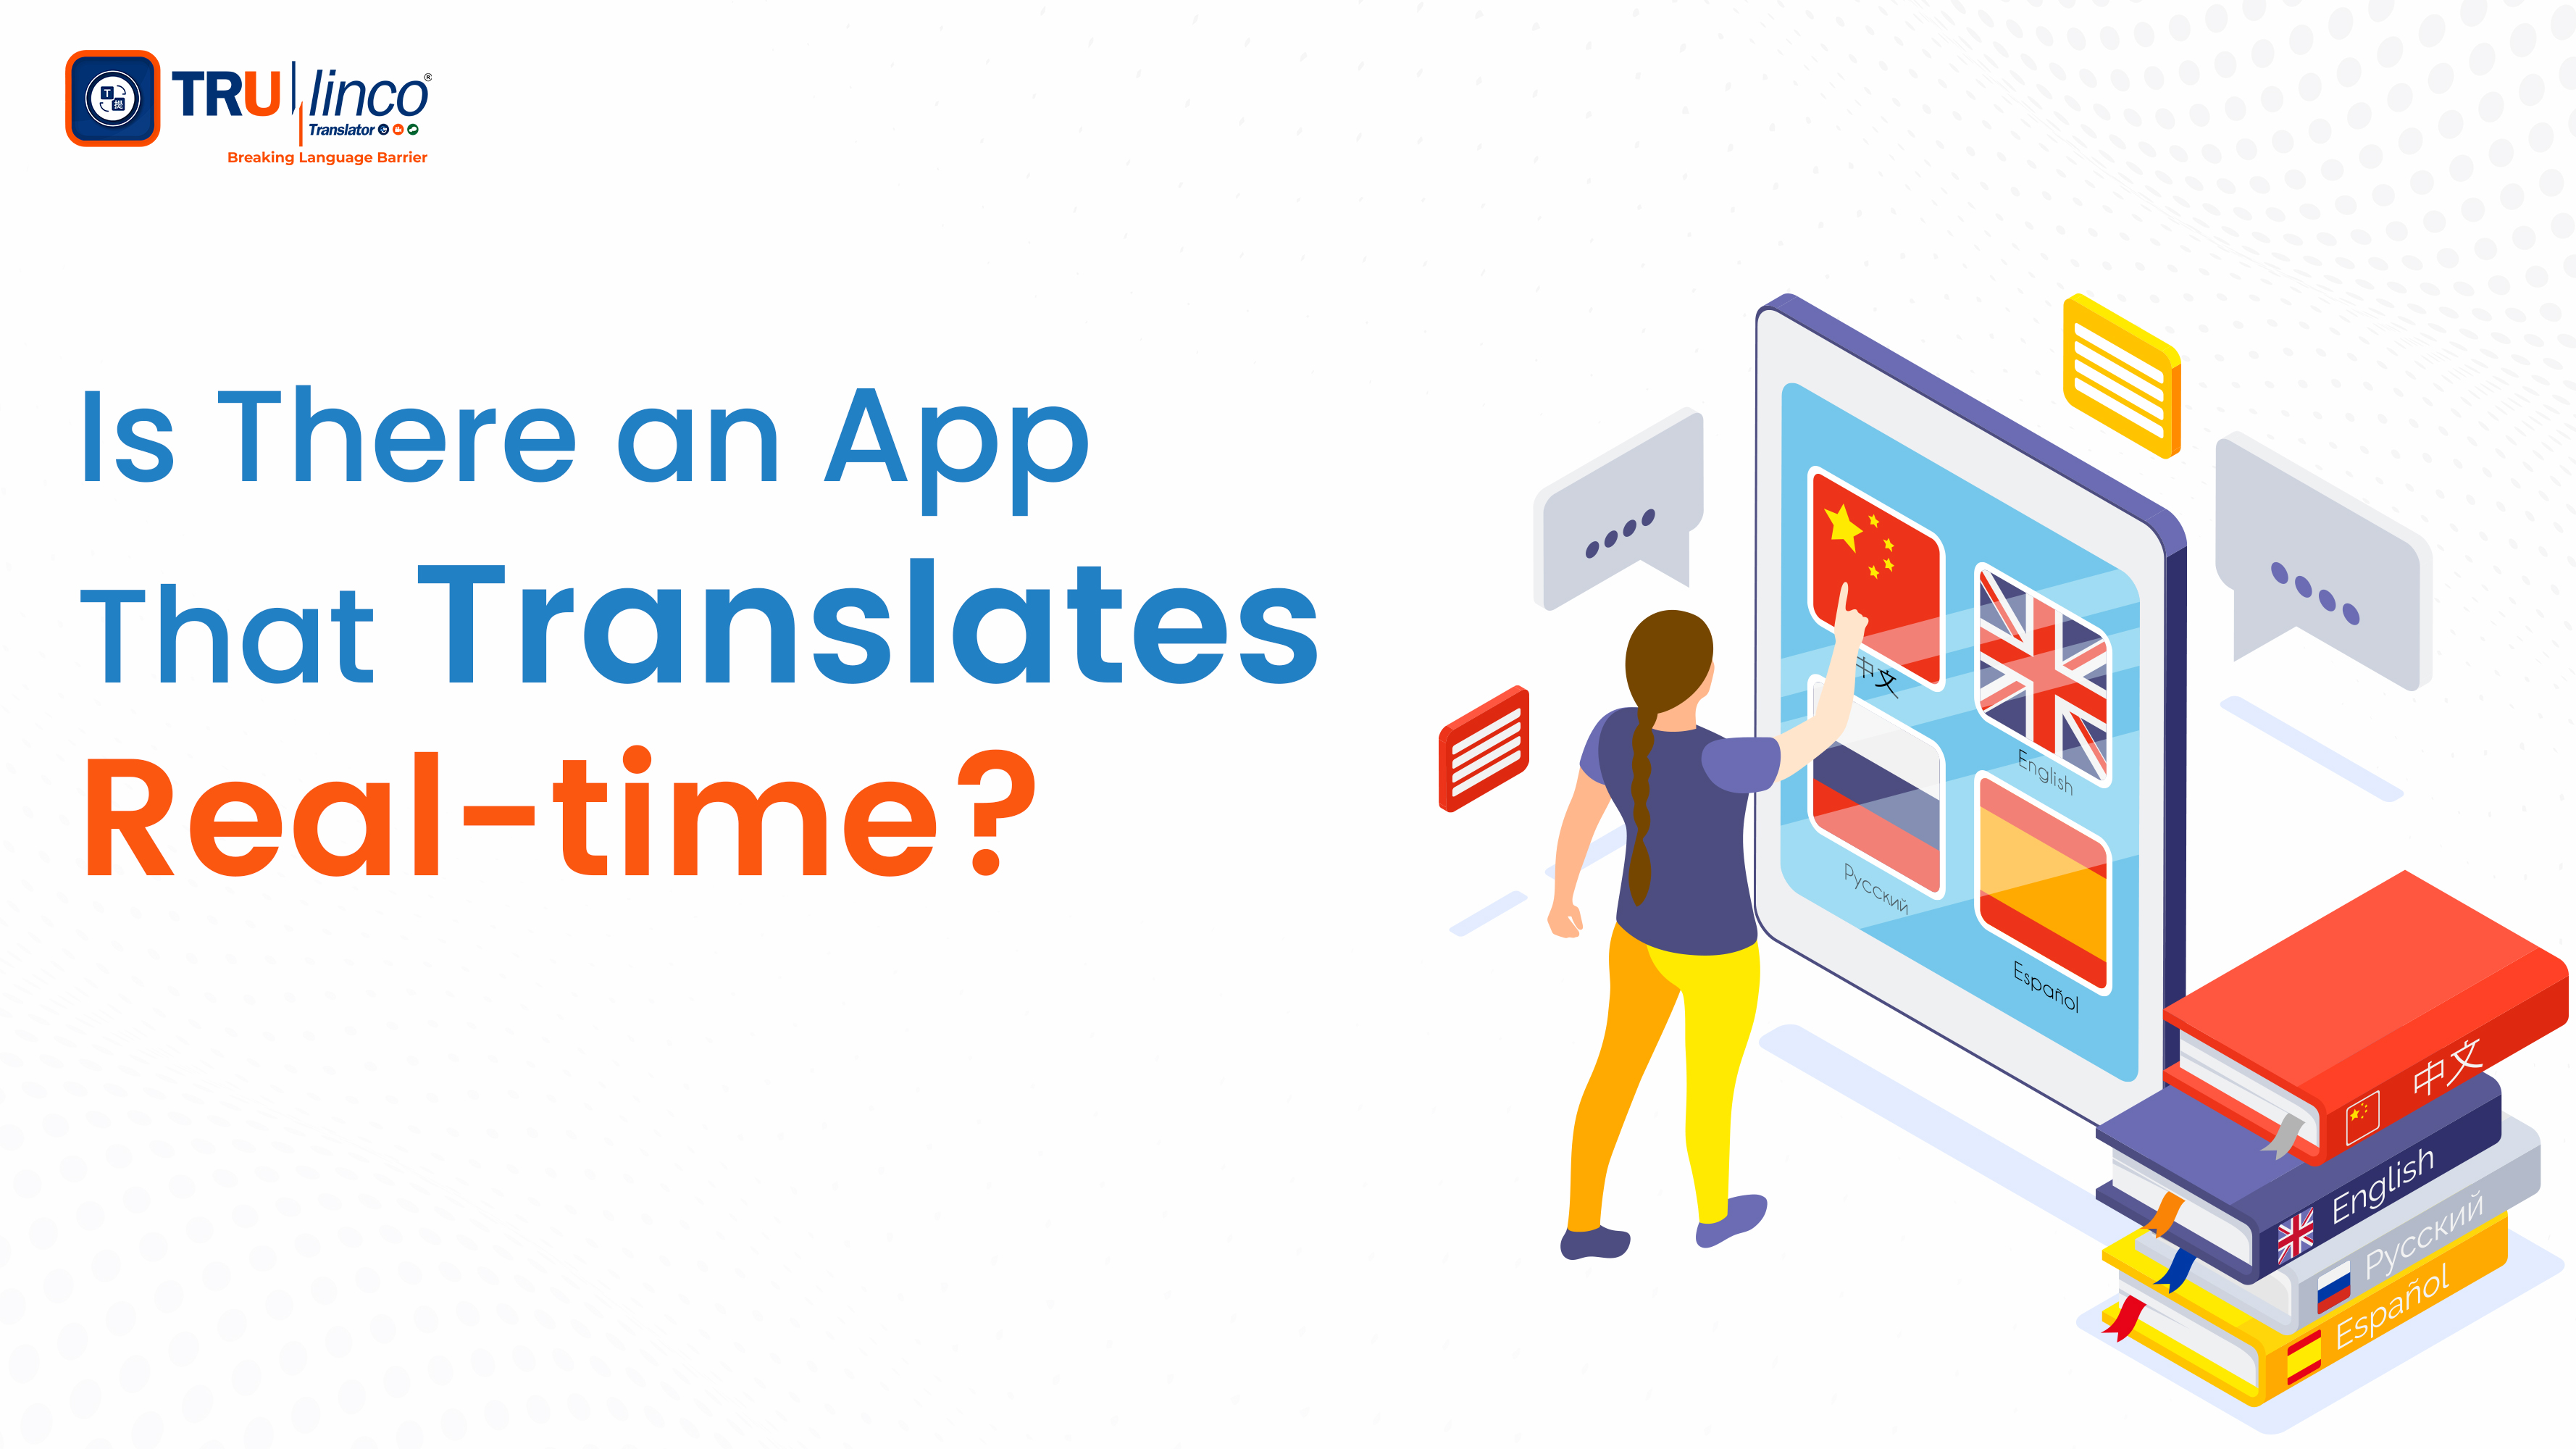 Is there an app that translates real-time